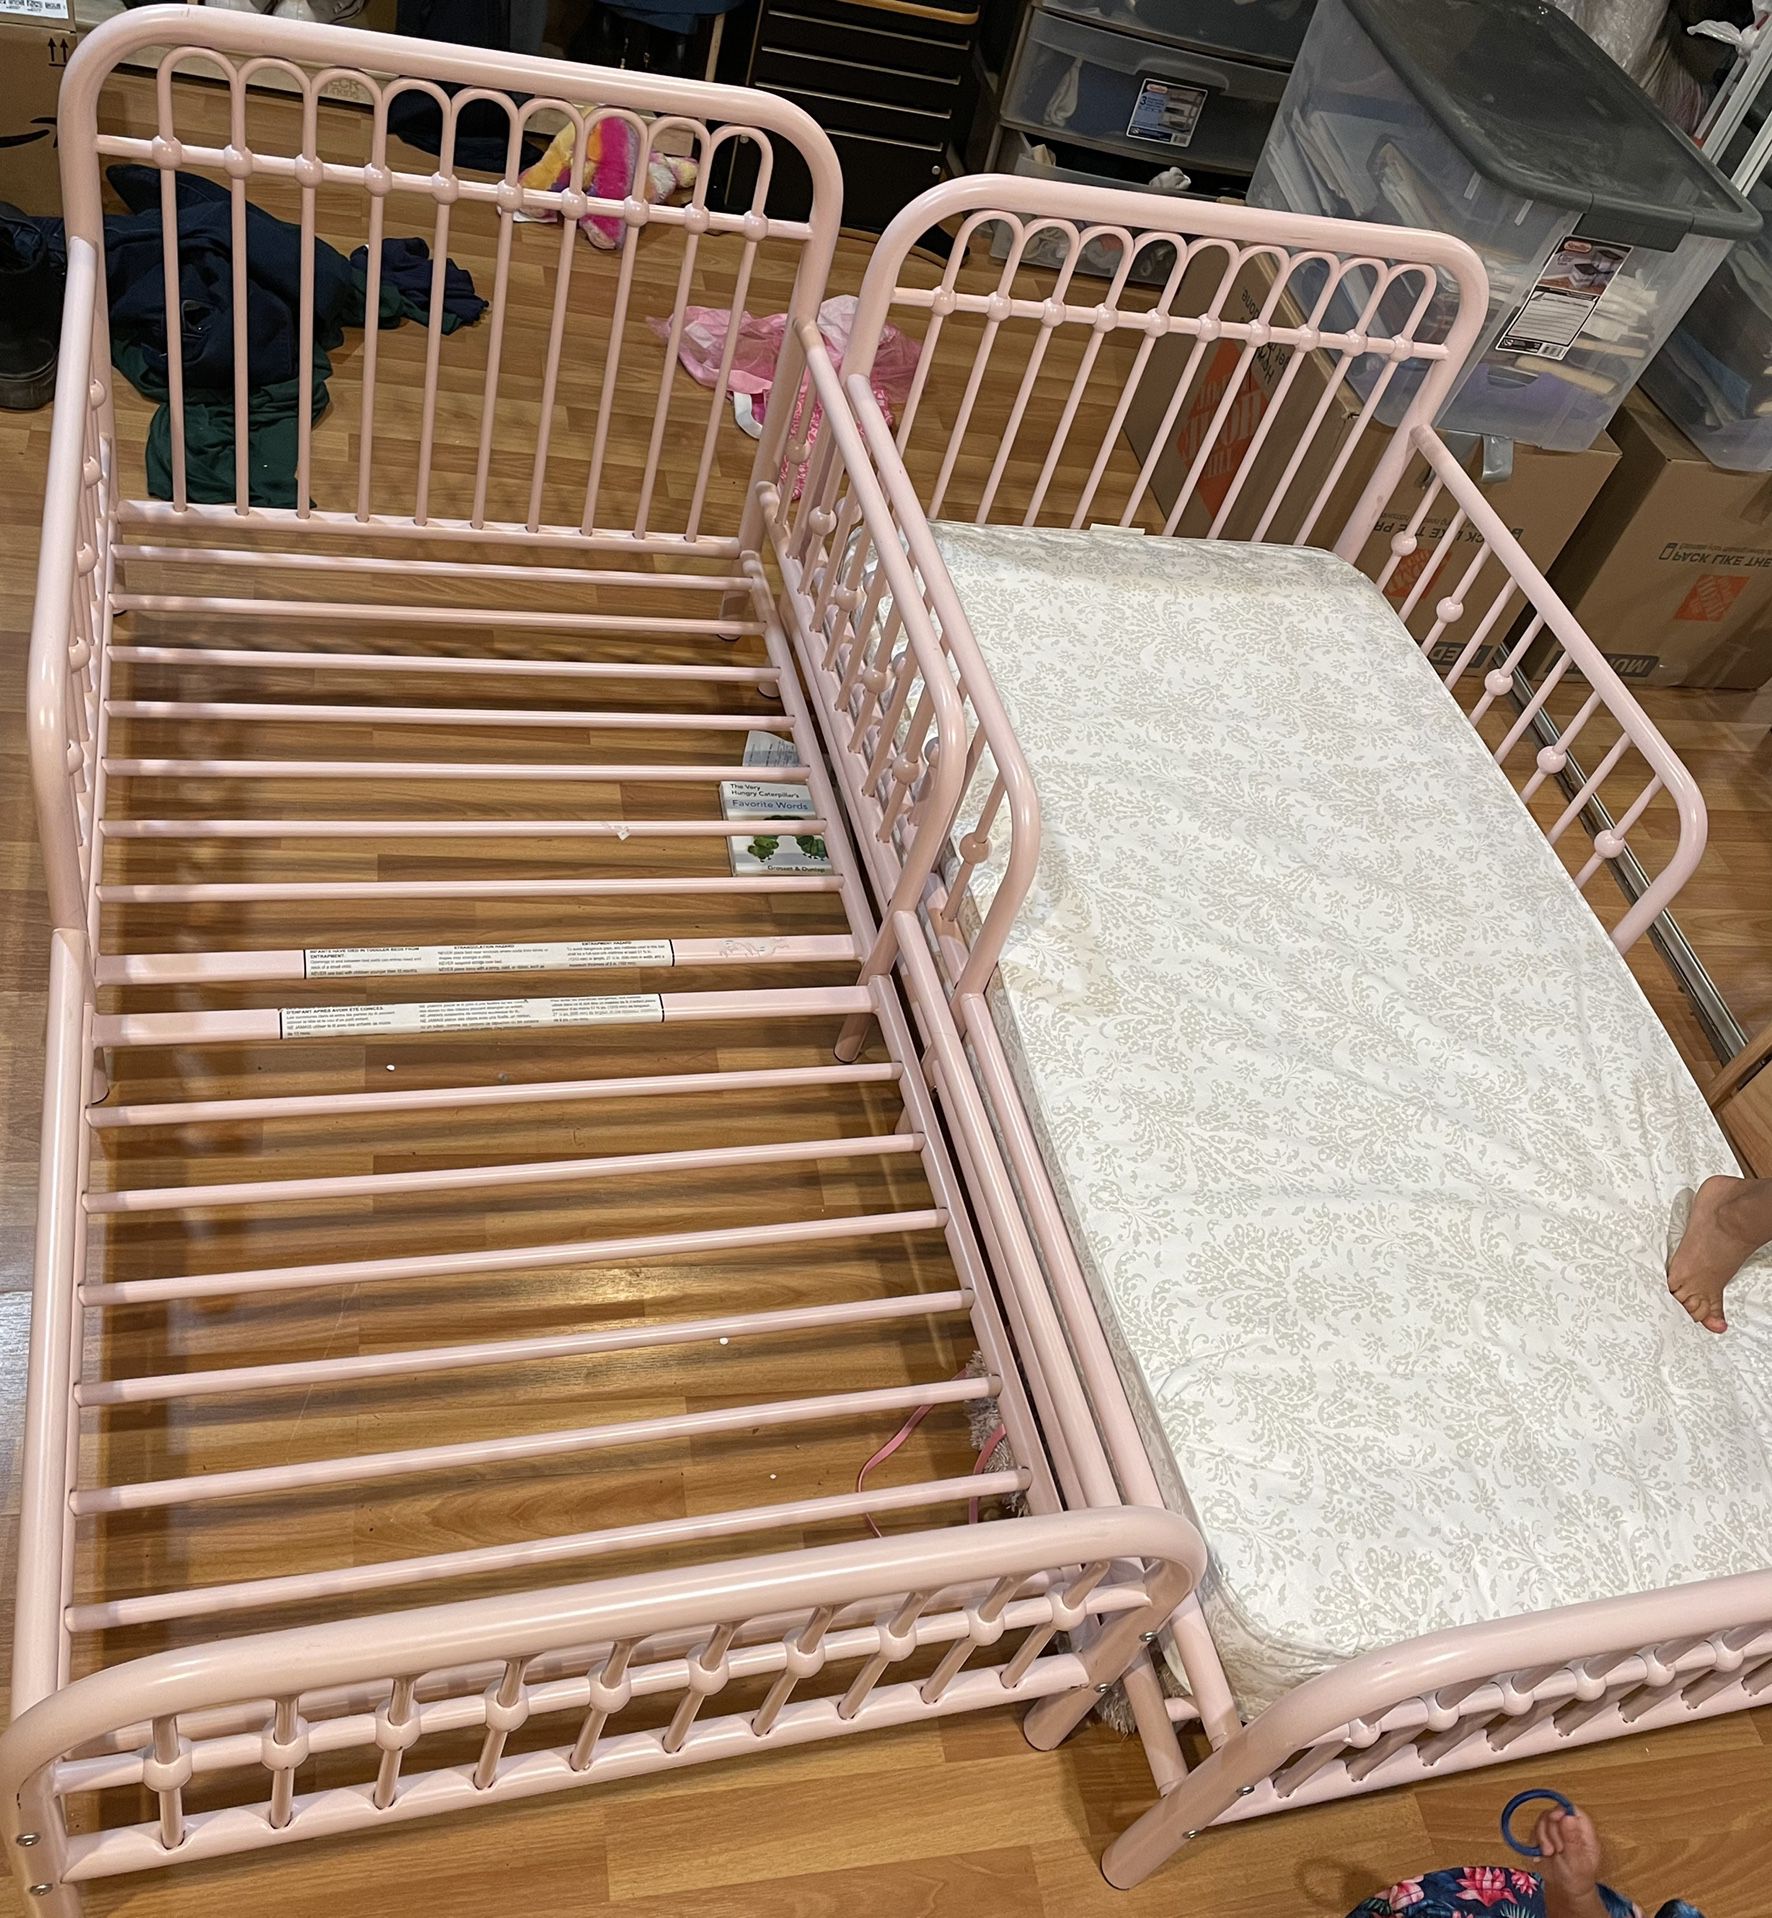 2 Toddler Size Bed